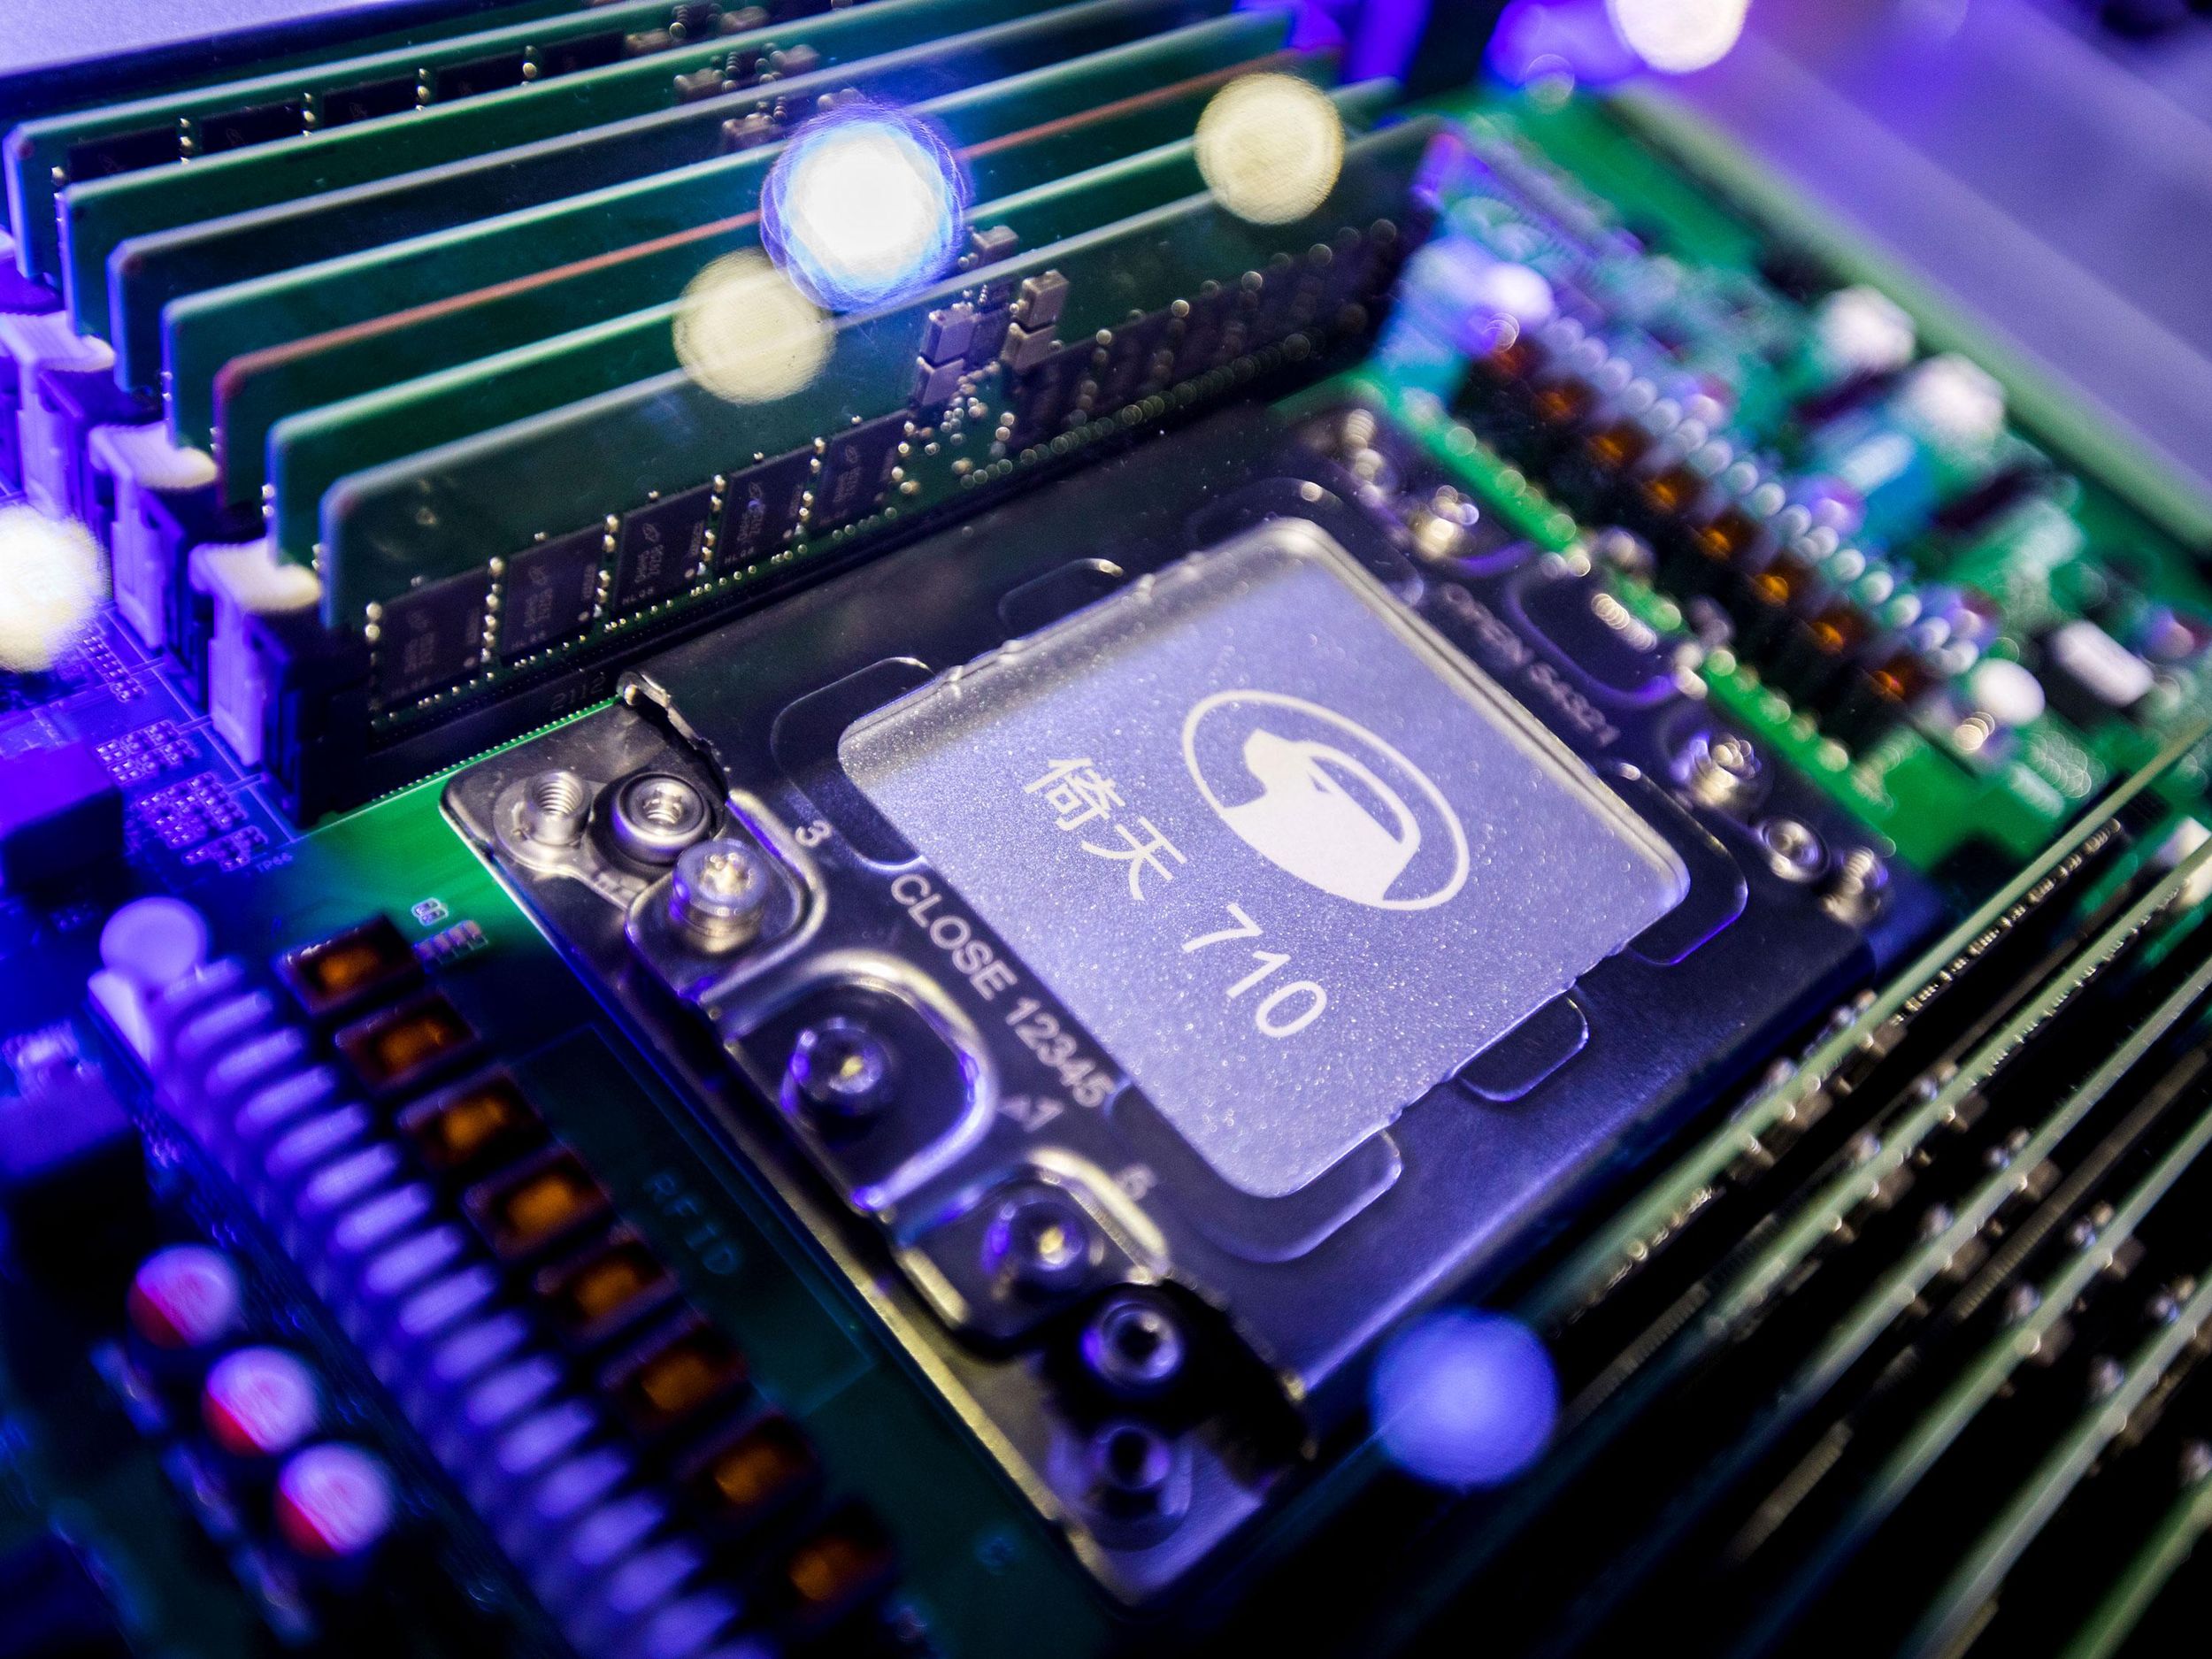 ​A photograph of a computer motherboard. In the center is a relatively large chip with Chinese lettering and the number 710 